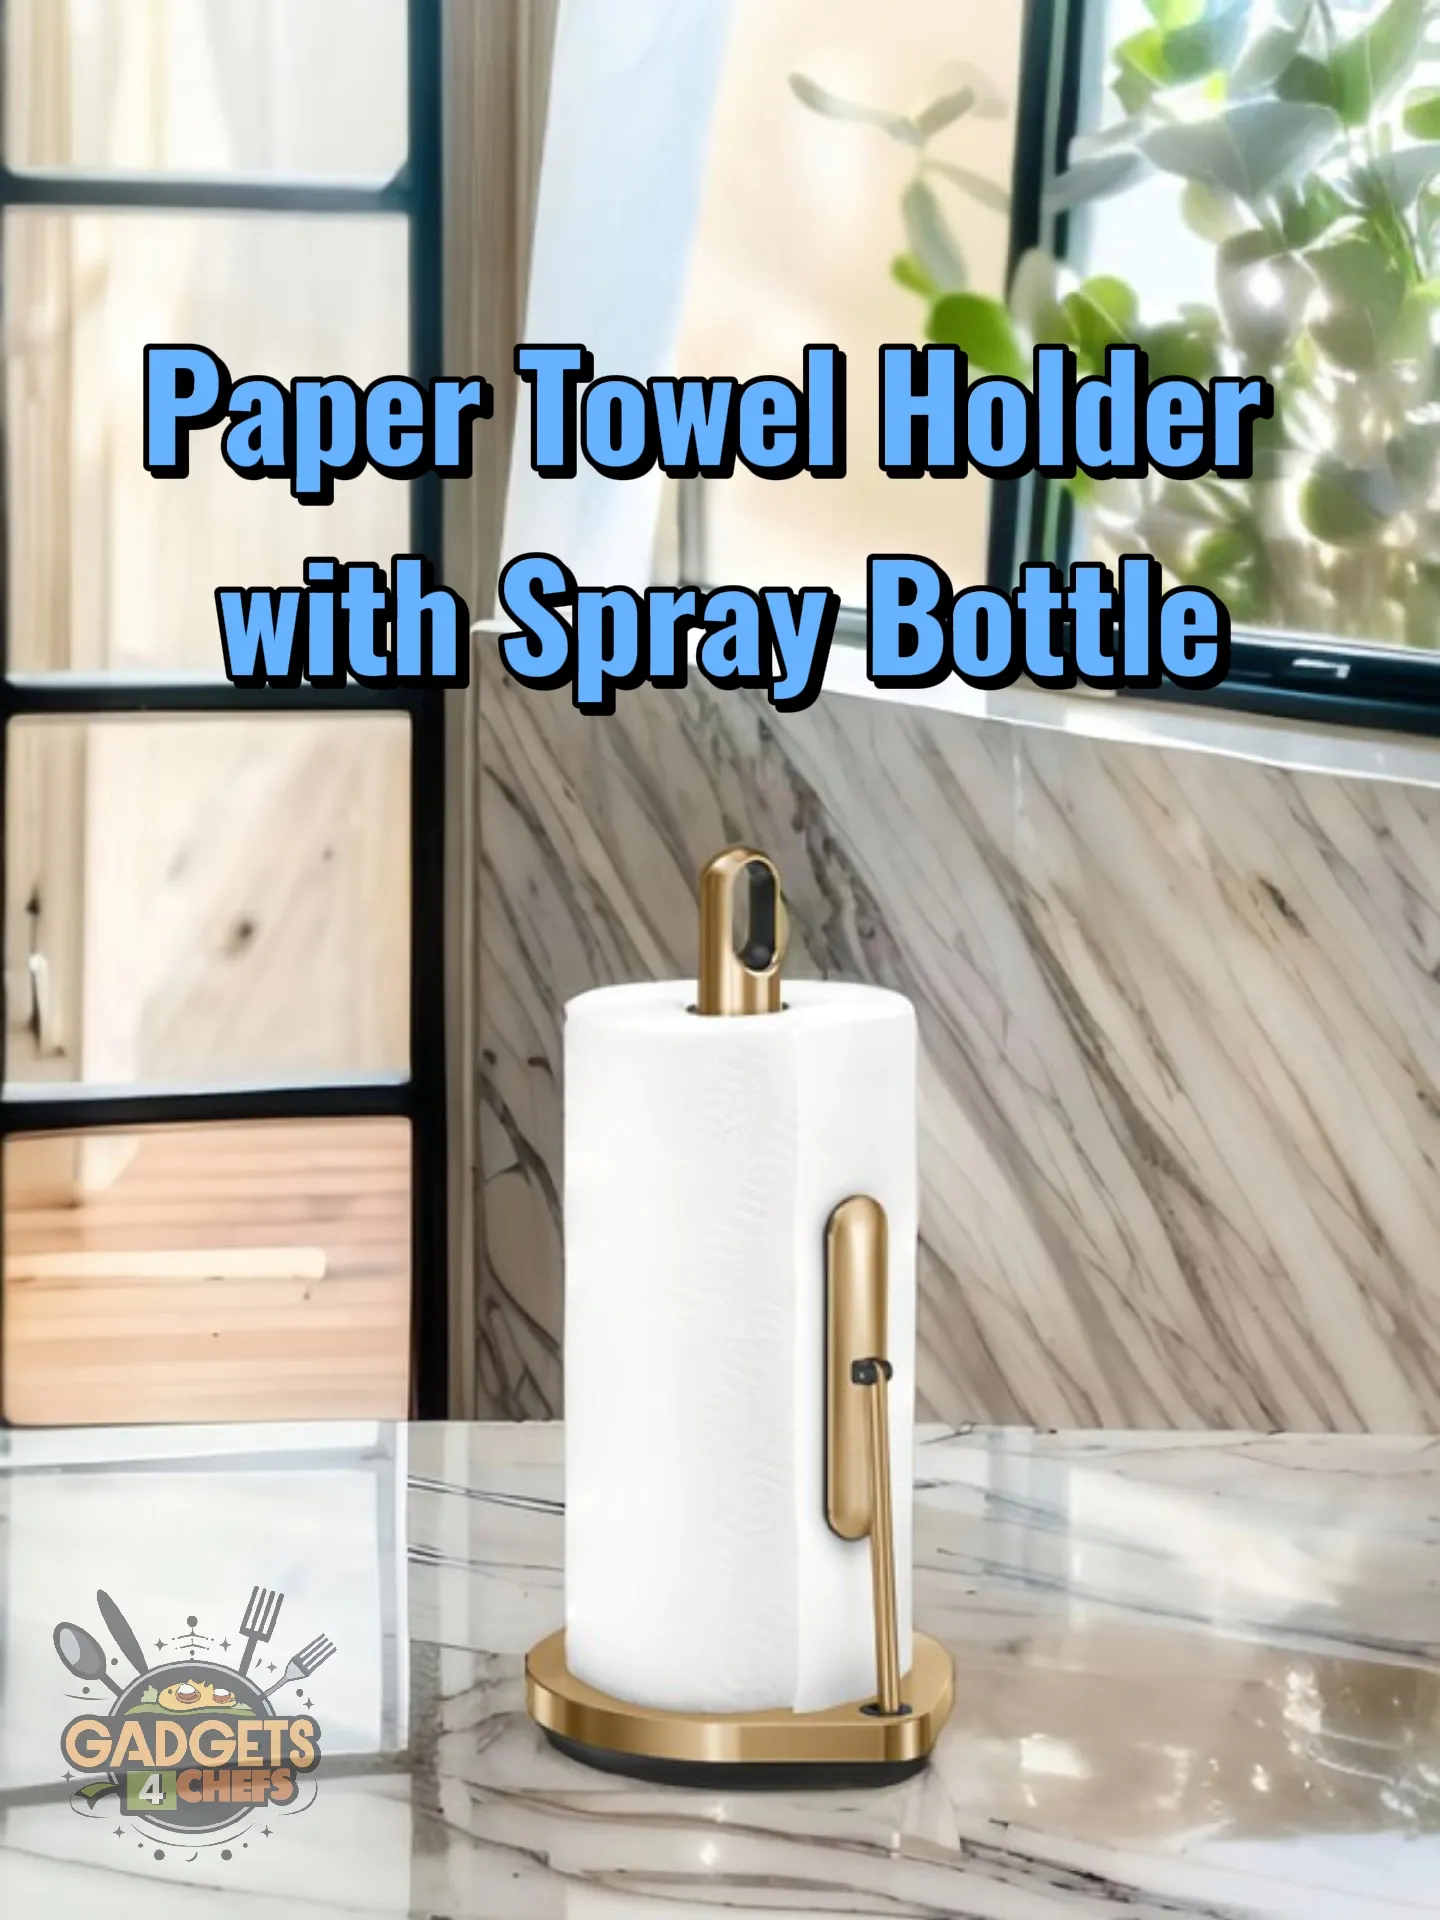 Paper Towel Holder with Spray Bottle